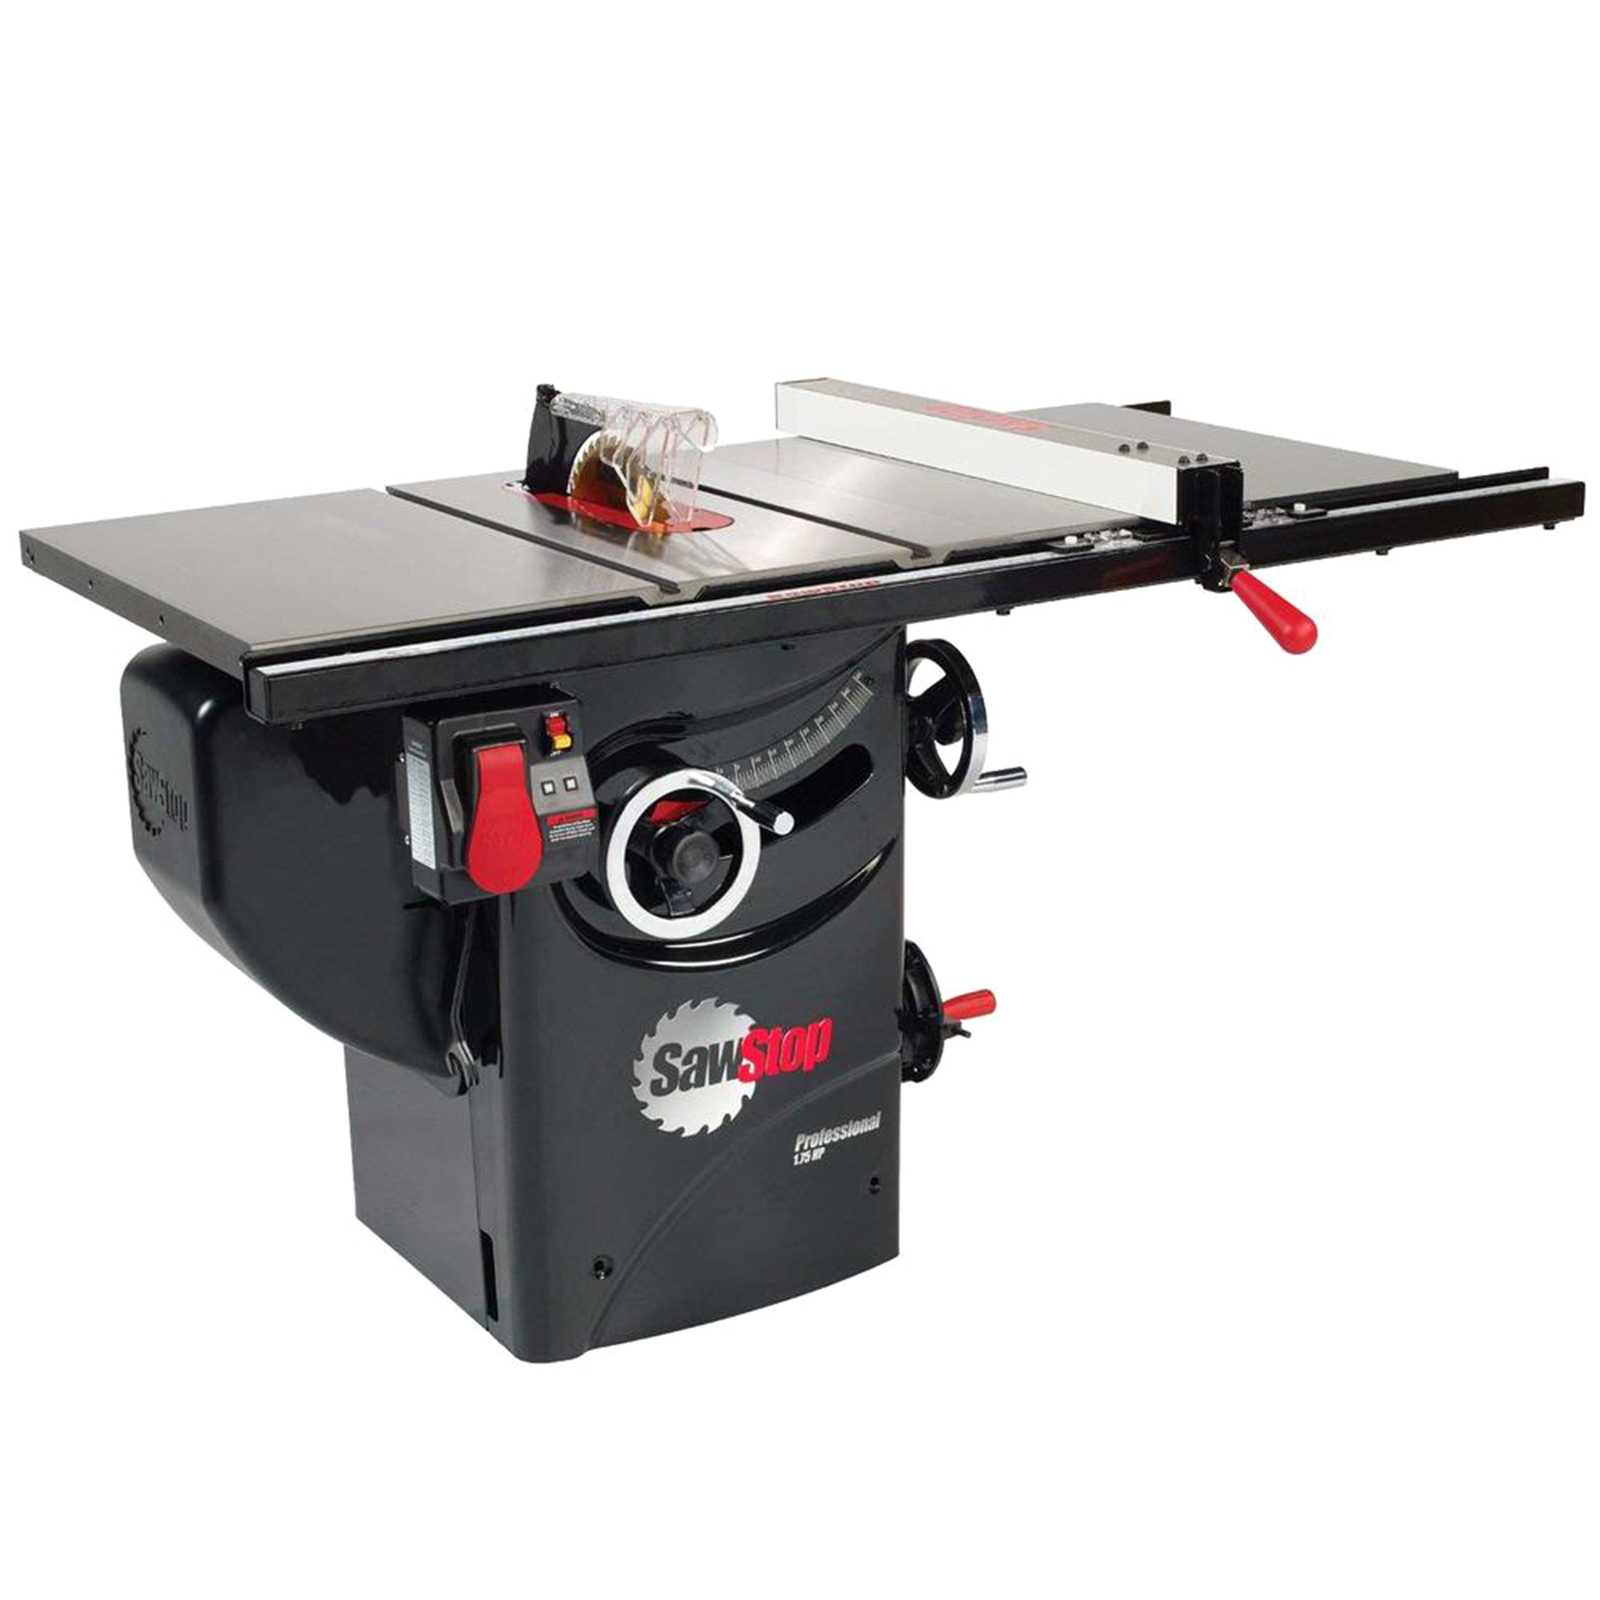 SawStop 1.75HP 10" Professional Fence Cabinet Saw